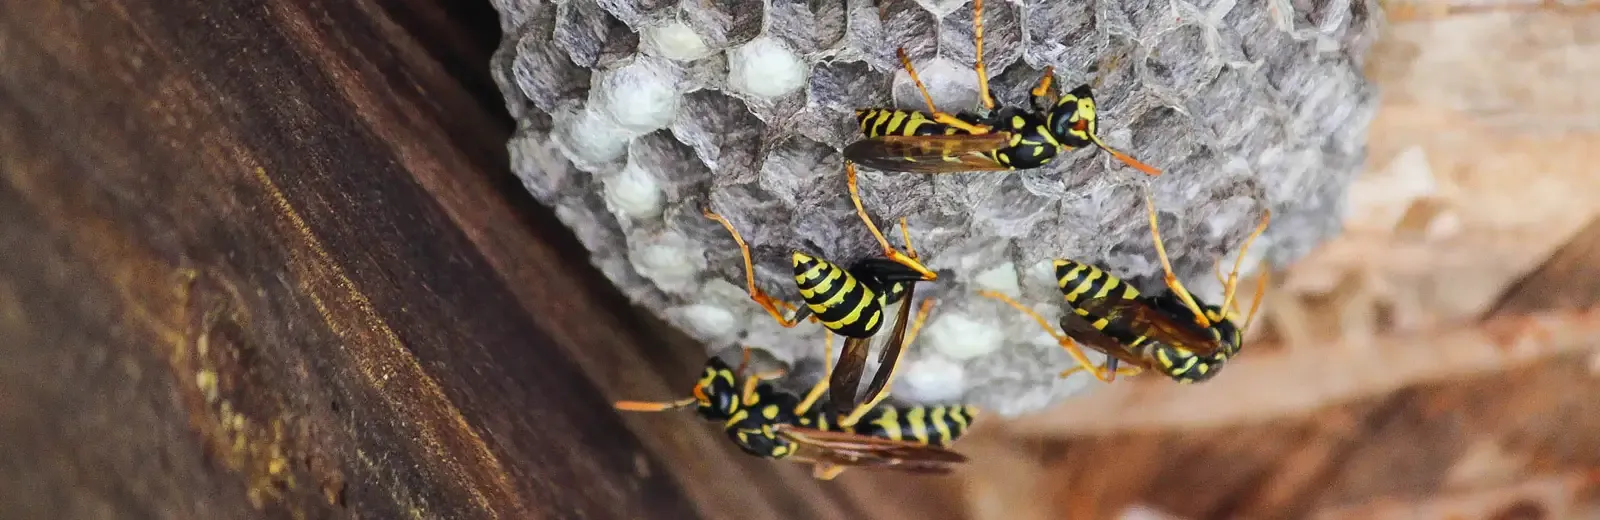 wasp on nests